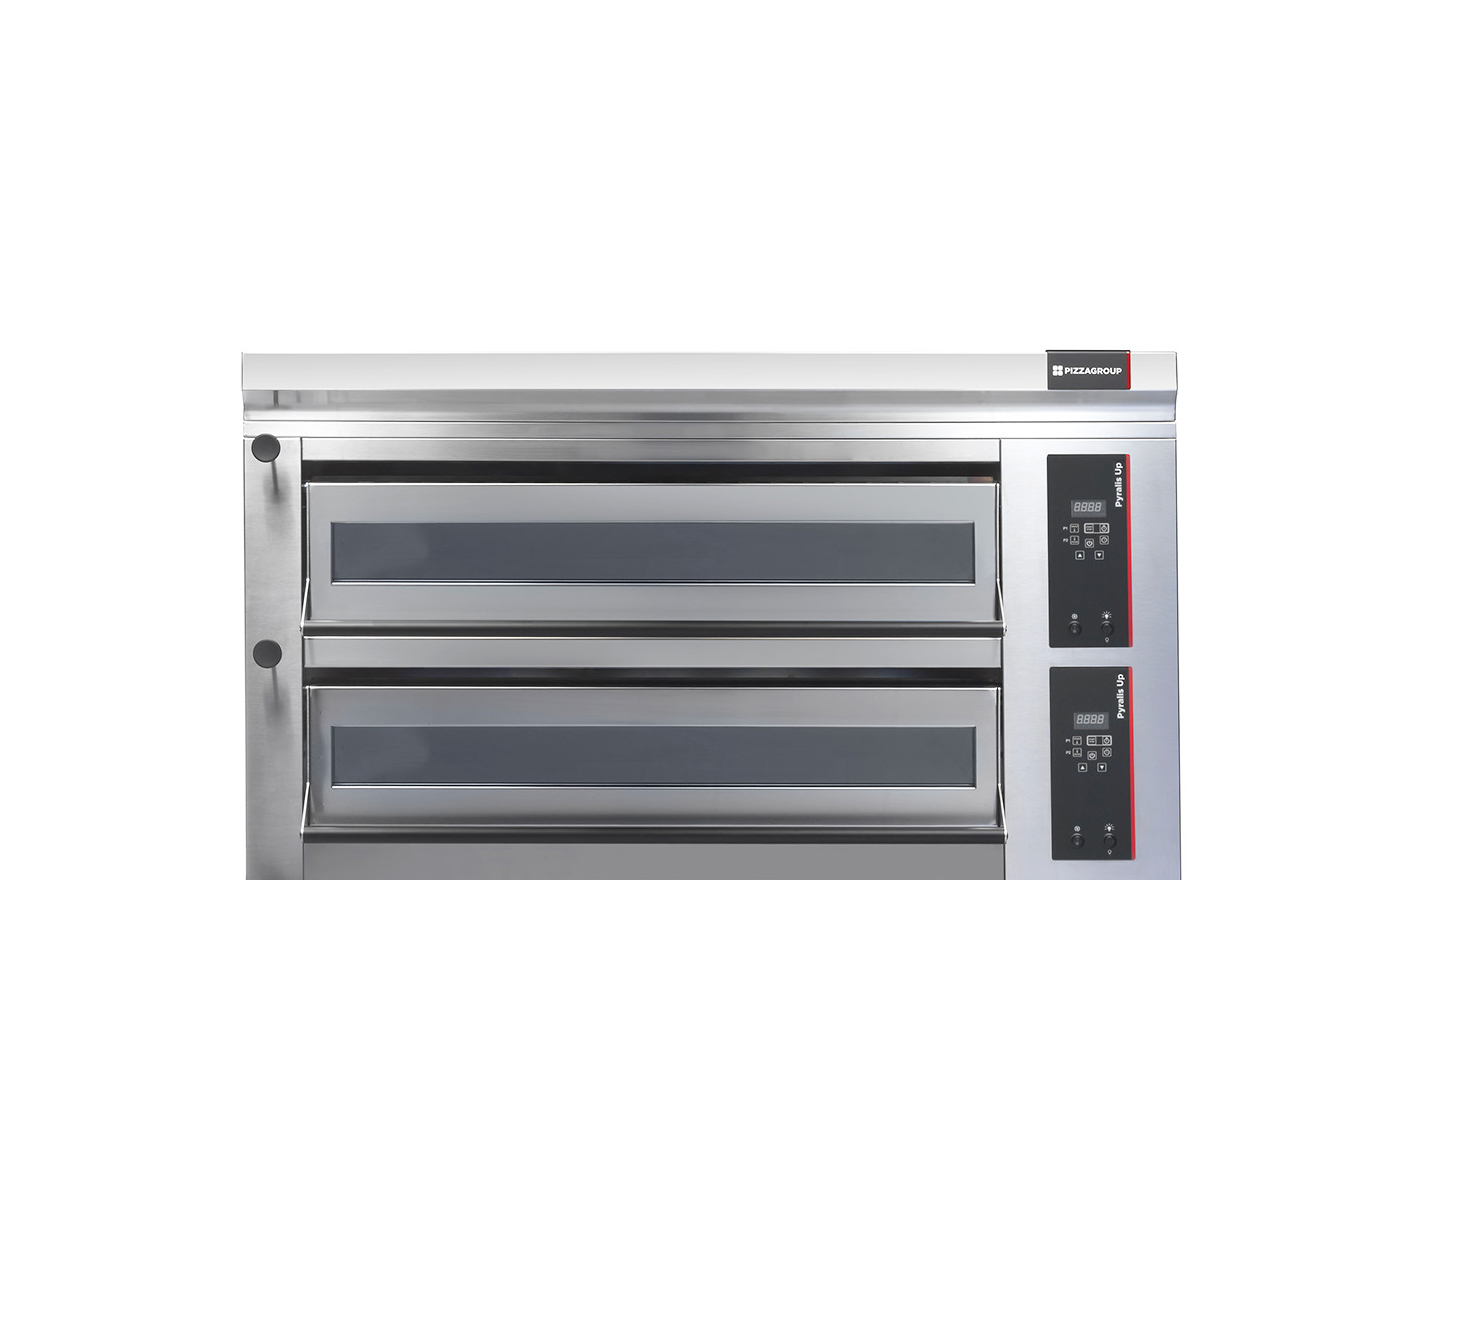 PIZZAGROUP Pyralis Up PY-UP M8 Double Deck Electric Pizza Oven